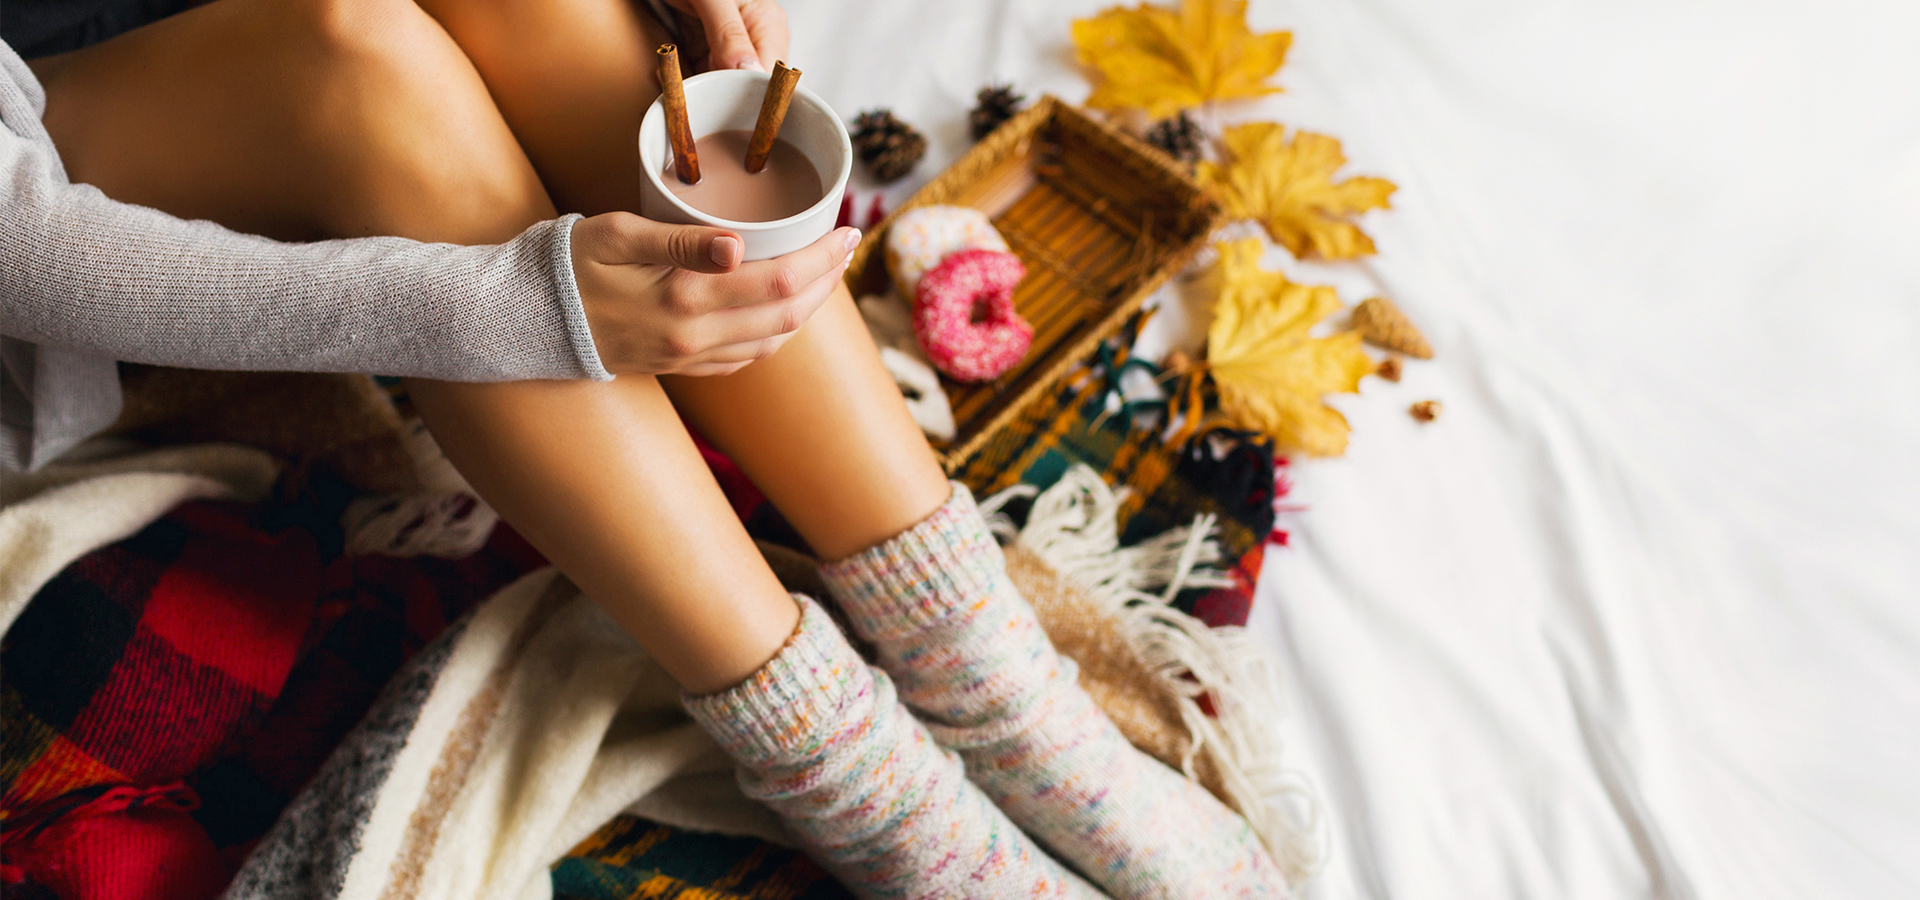 How to incorporate Hygge into your everyday life